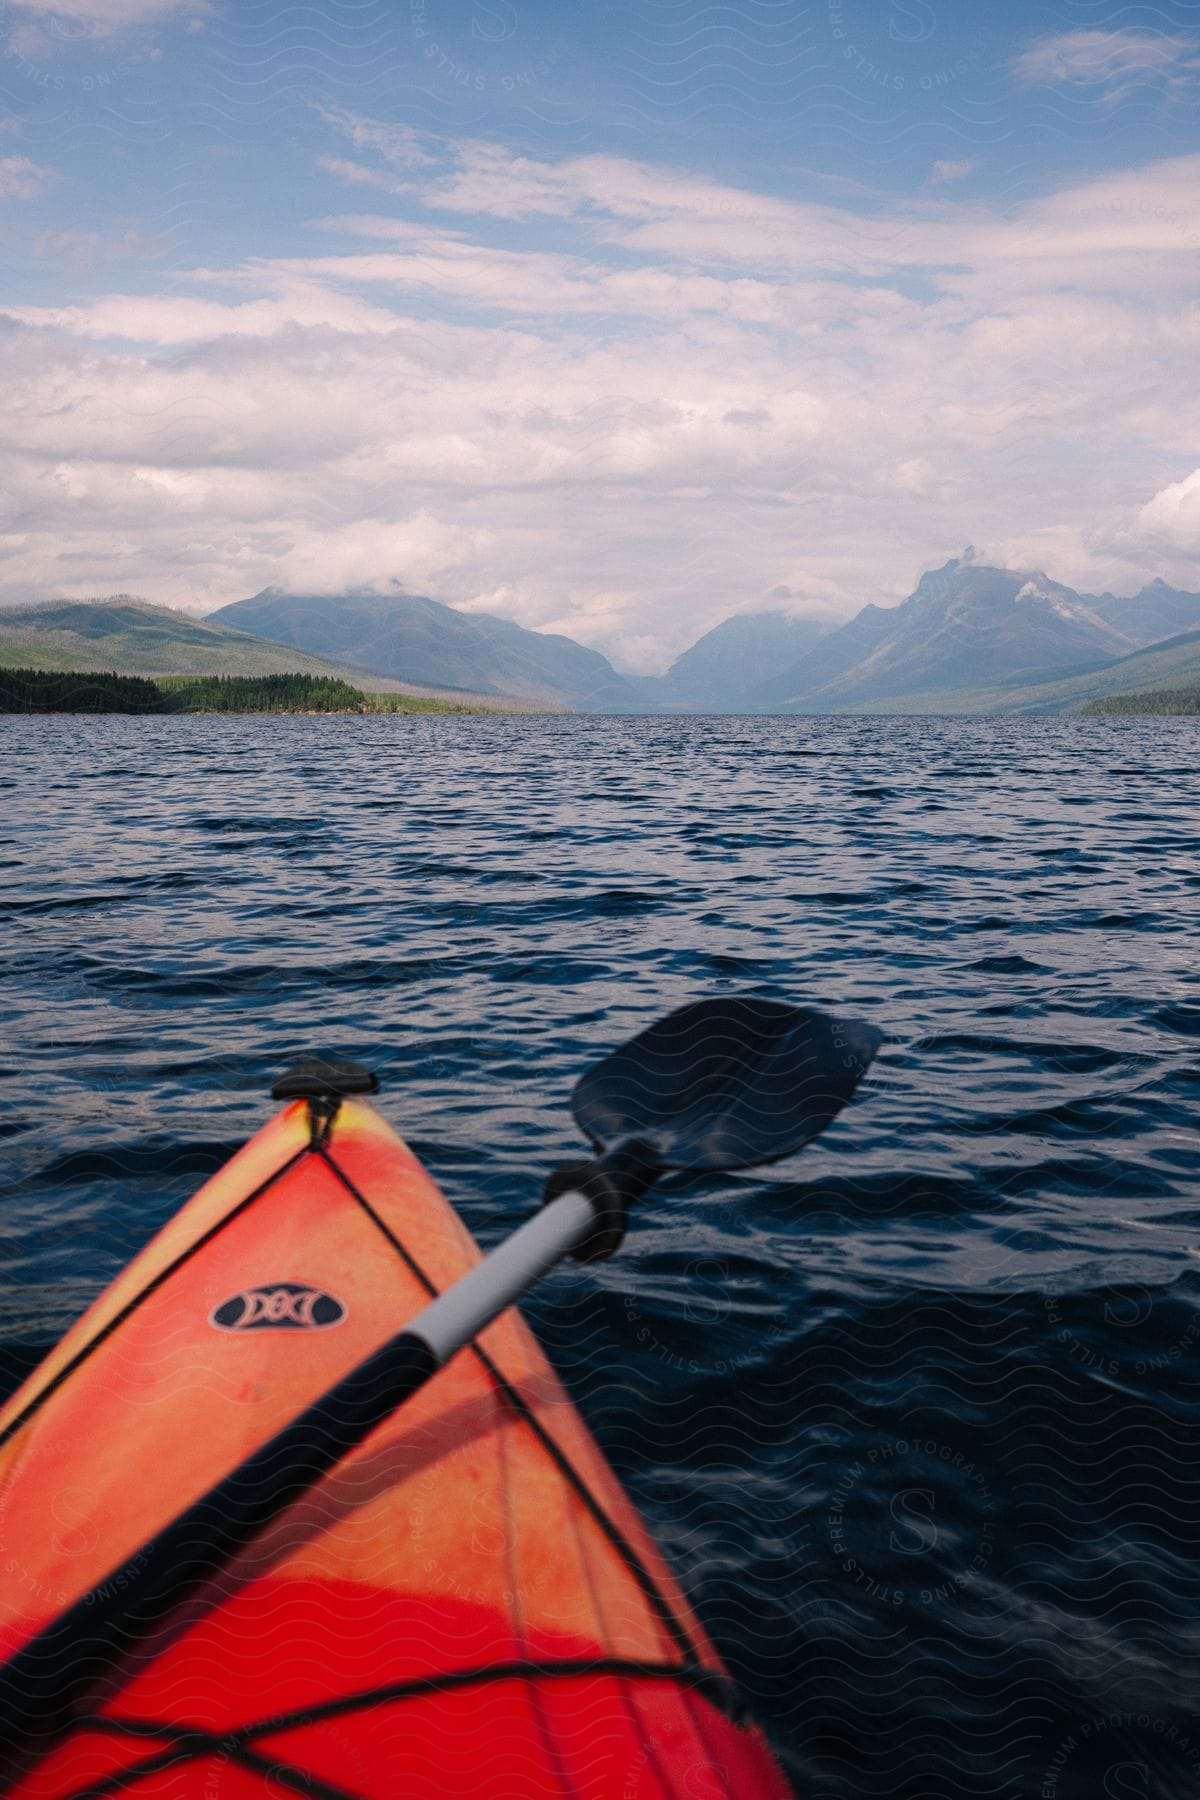 A view of a kayak floating on the water on a lake